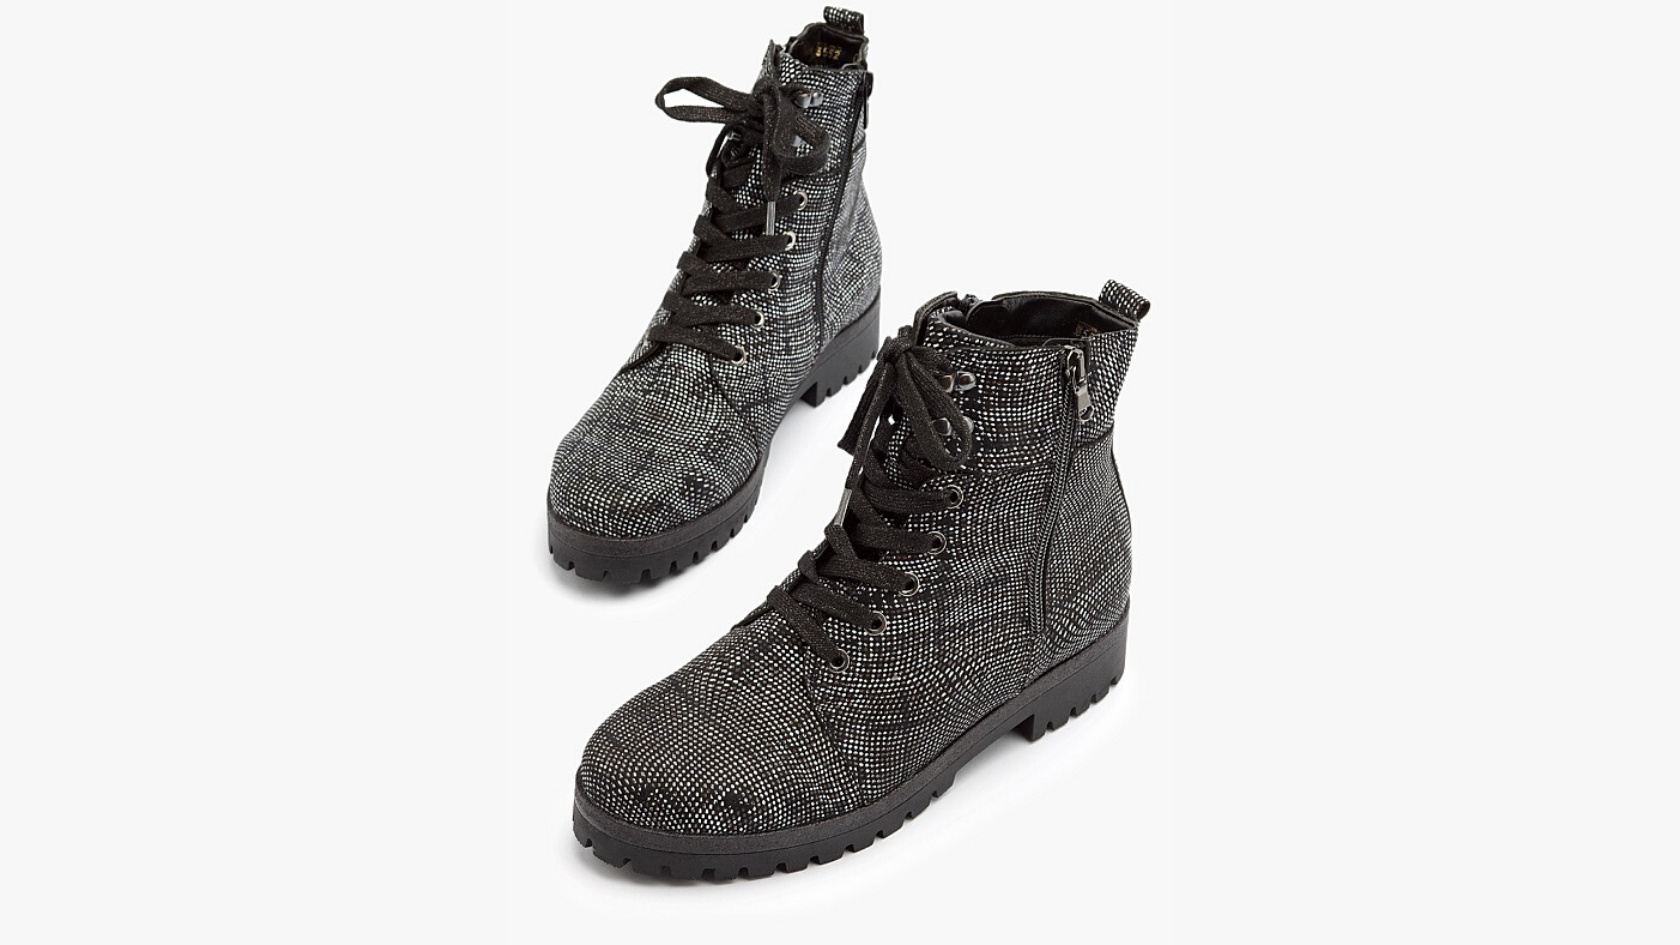 A pair of women’s Waldlaufer black and white waterproof lace up boots against a neutral background. 